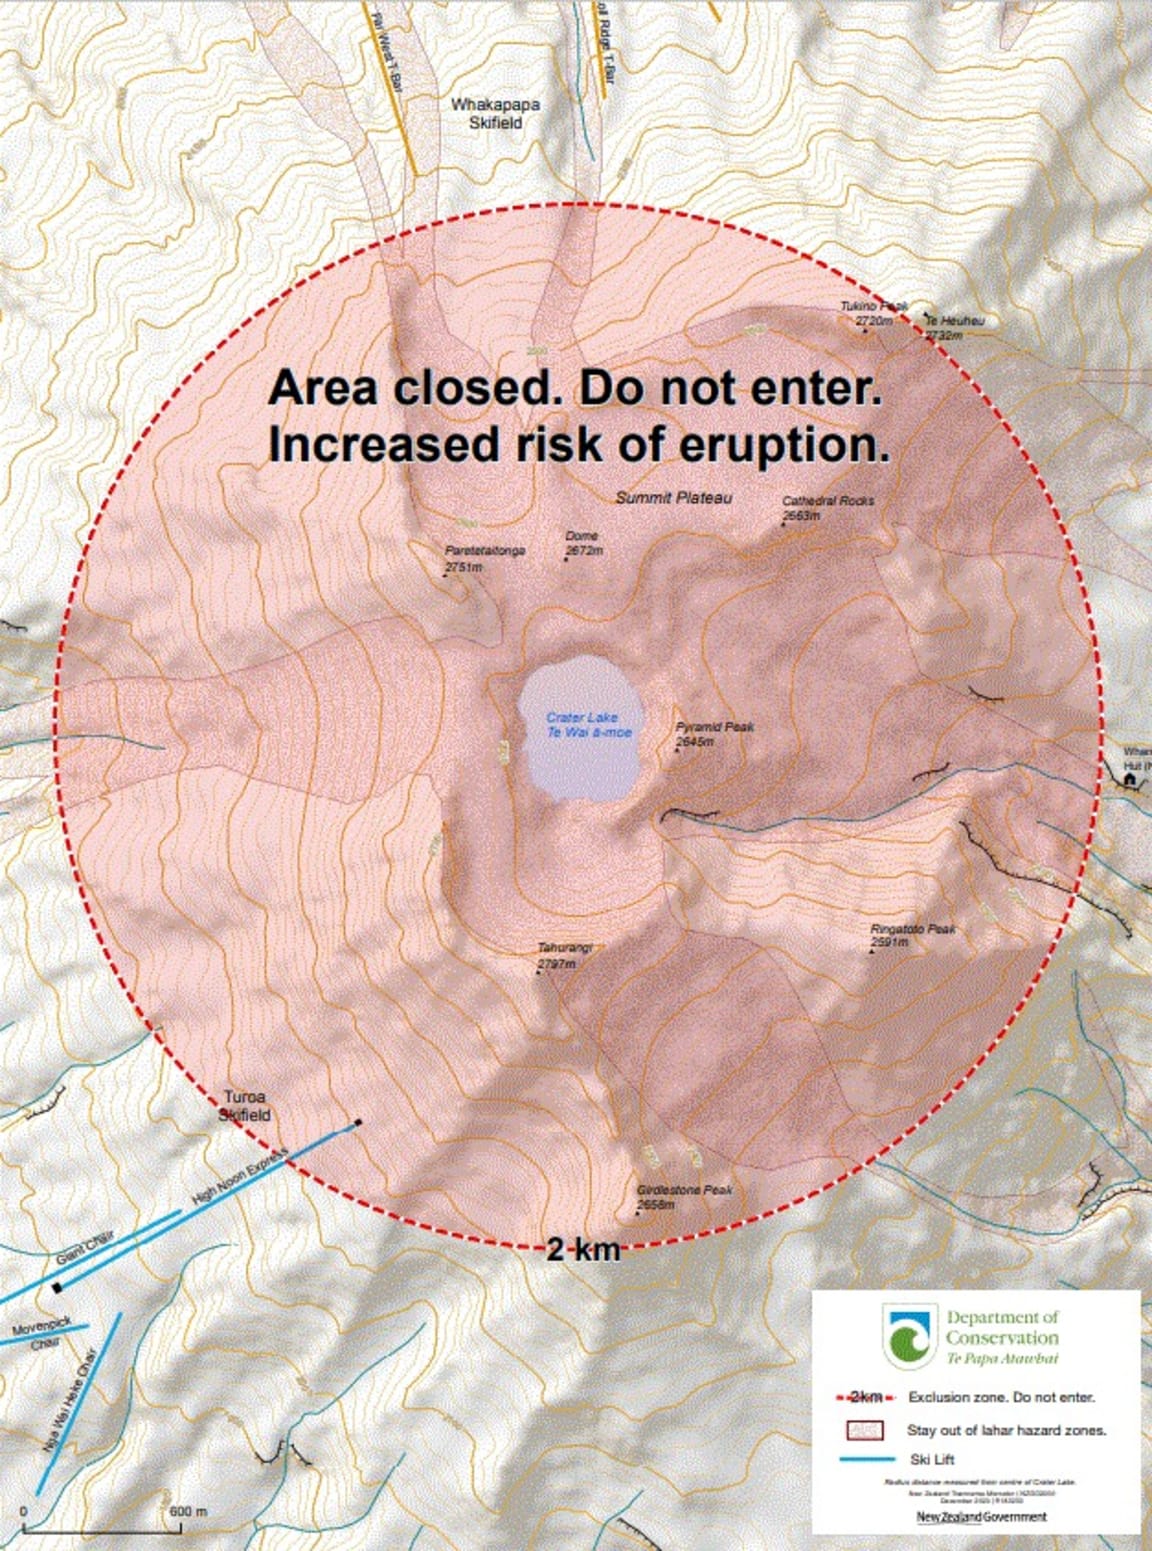 The Department of Conservation has closed an area 2km around the crater lake.